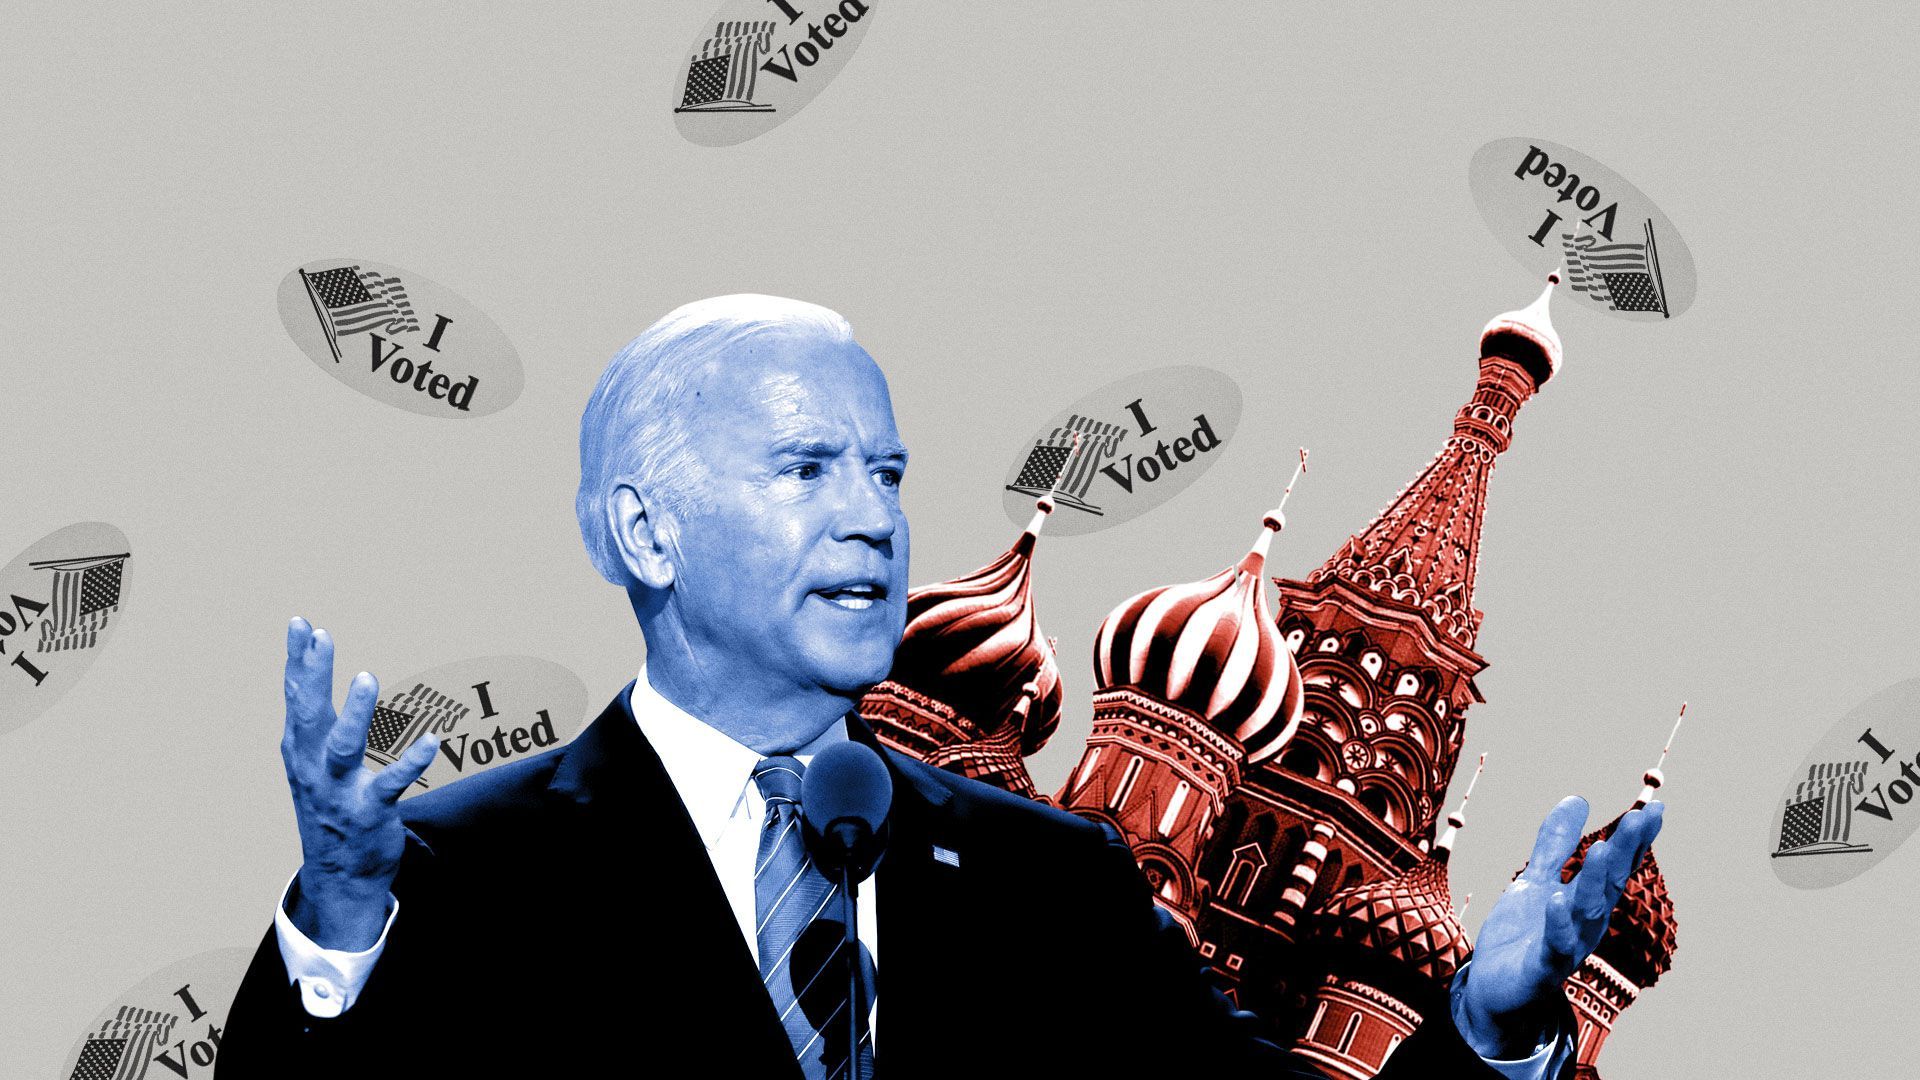 Photo illustration of Joe Biden, St. Basil Cathedral, and a pattern of “I voted” stickers